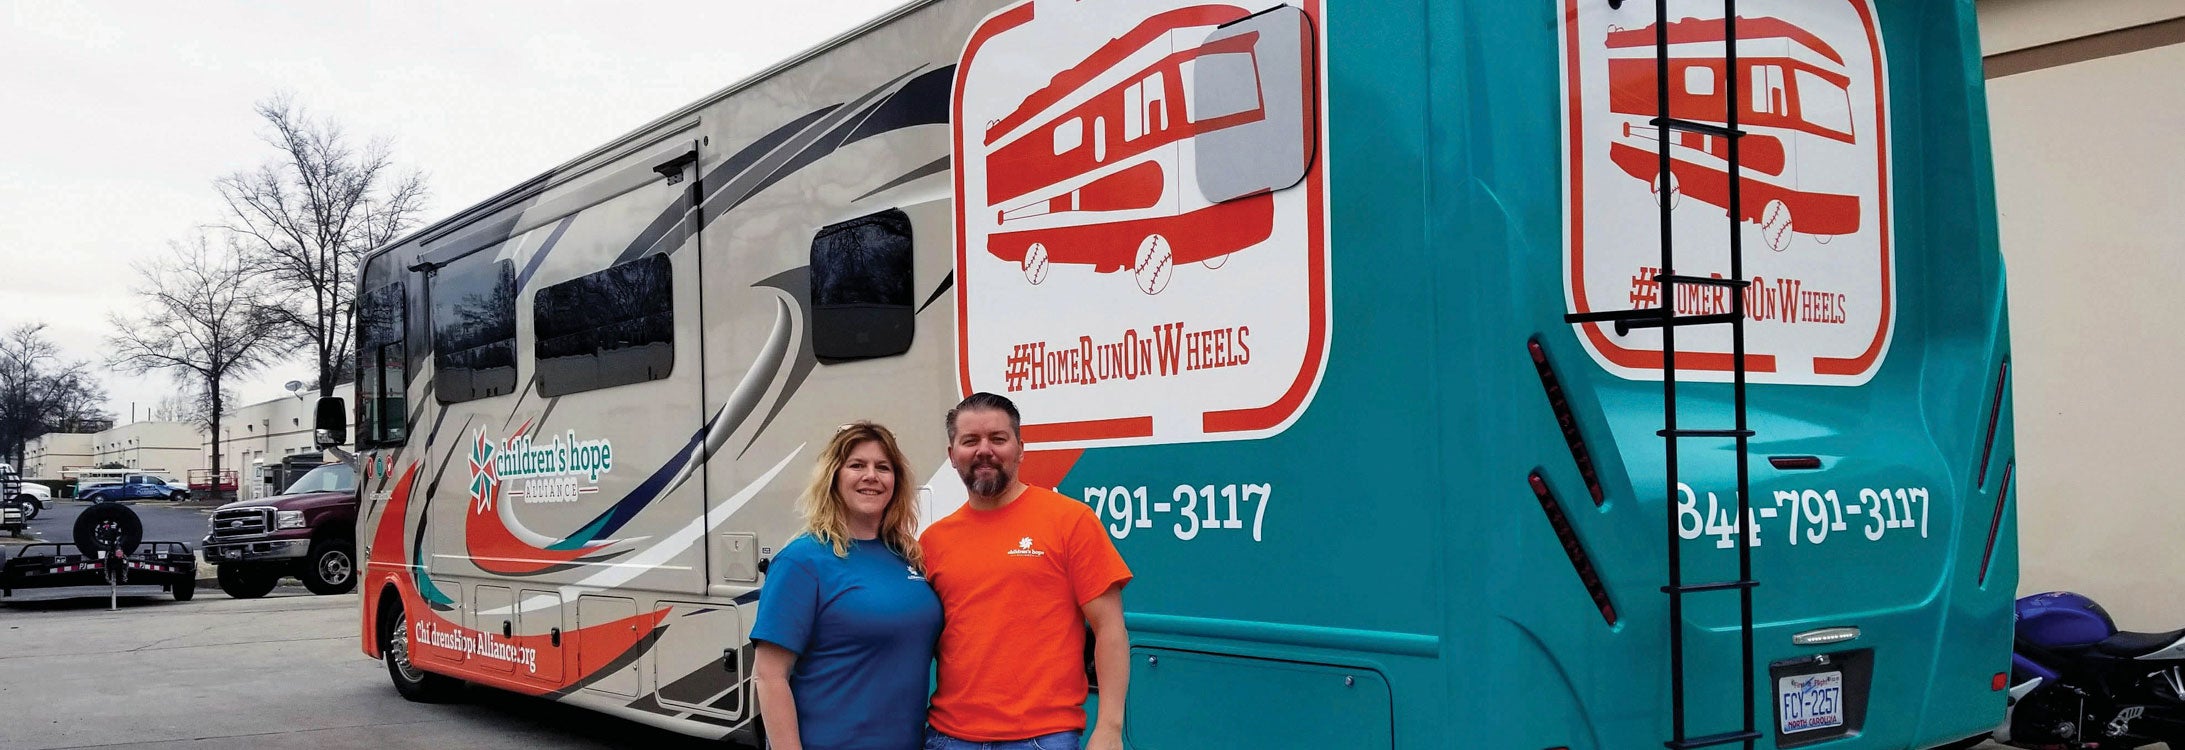 Ron and Patti Clements pose in front of the RV they drove
around the country and to Canada, taking foster children to
Major League Baseball games.